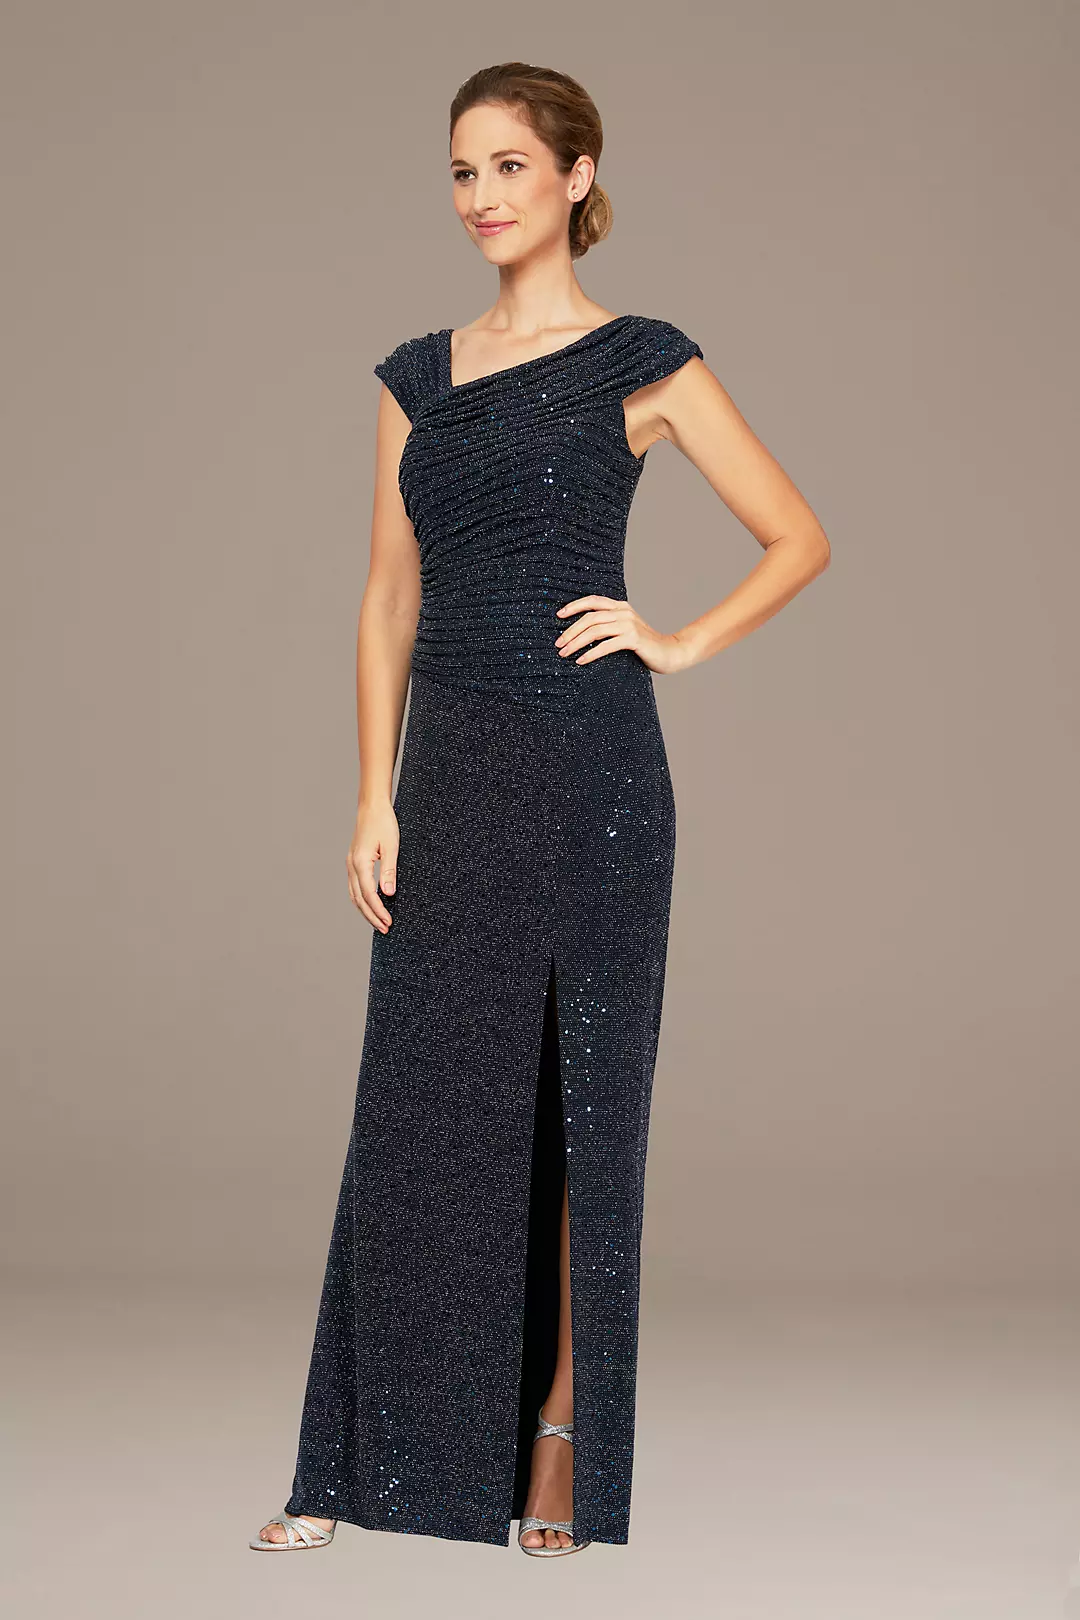 Asymmetrical Sequin and Metallic Gown with Slit Image